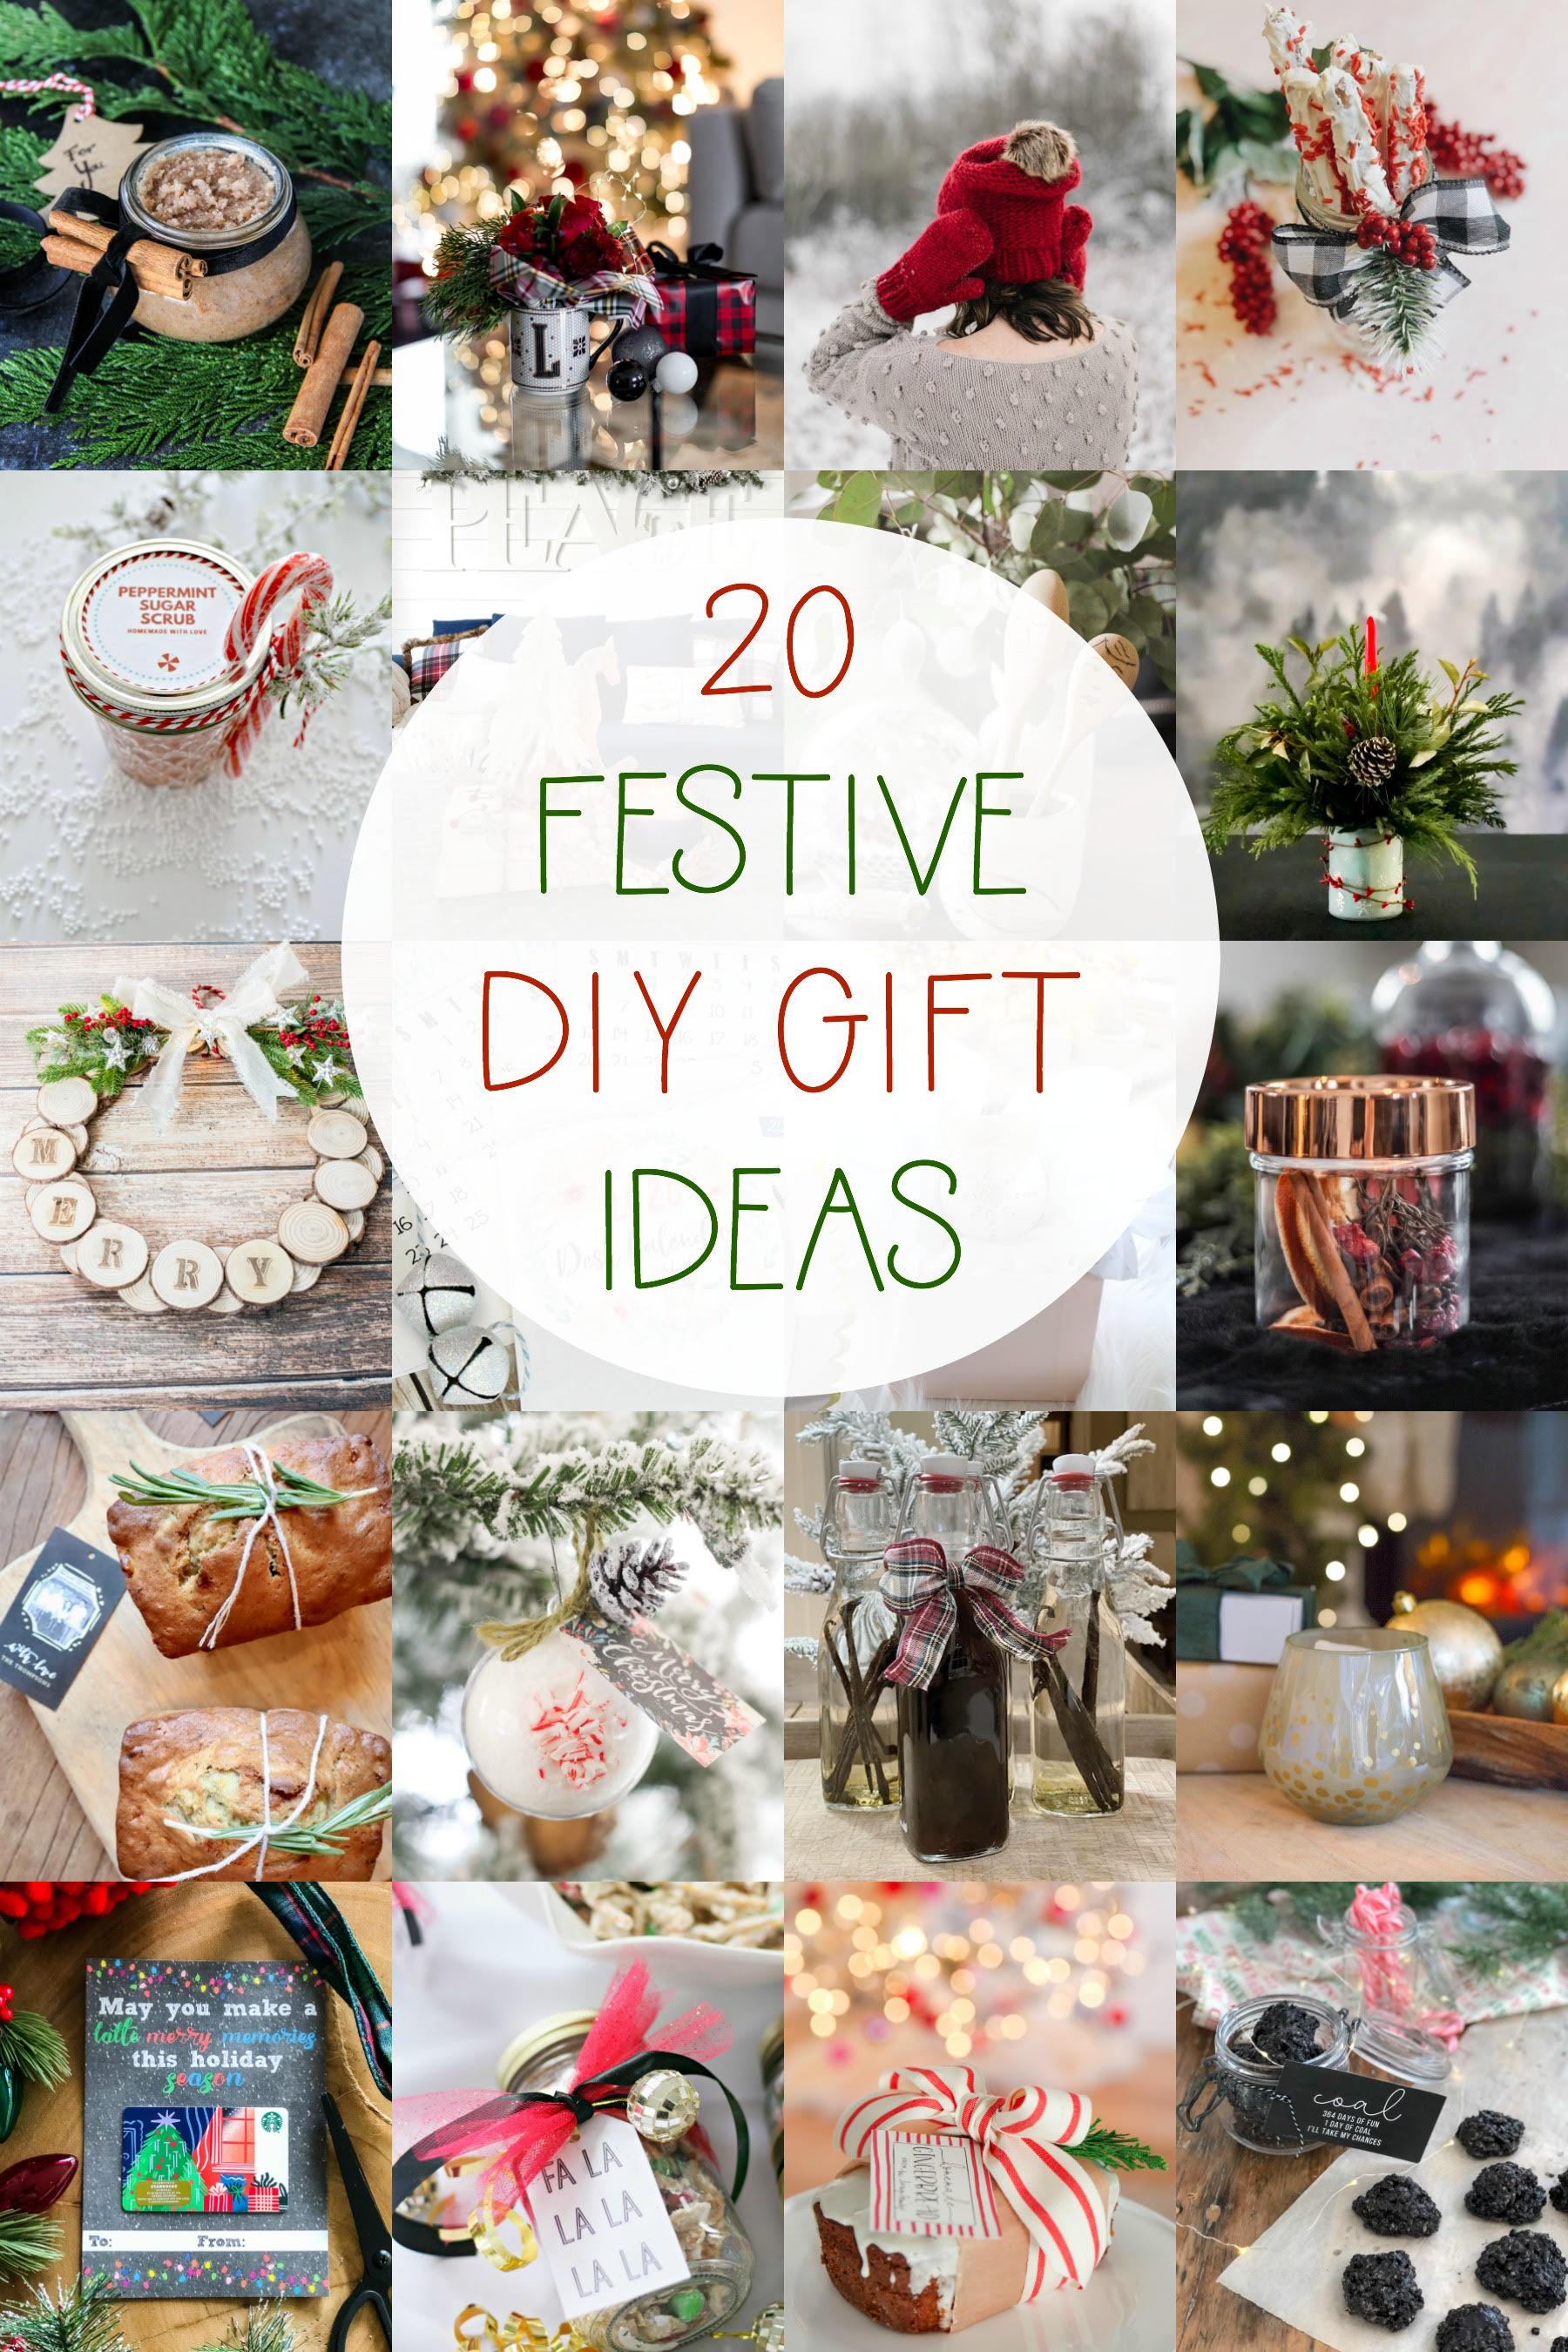 20 Easy Christmas Diy T Ideas For The Holiday Season This Is Our